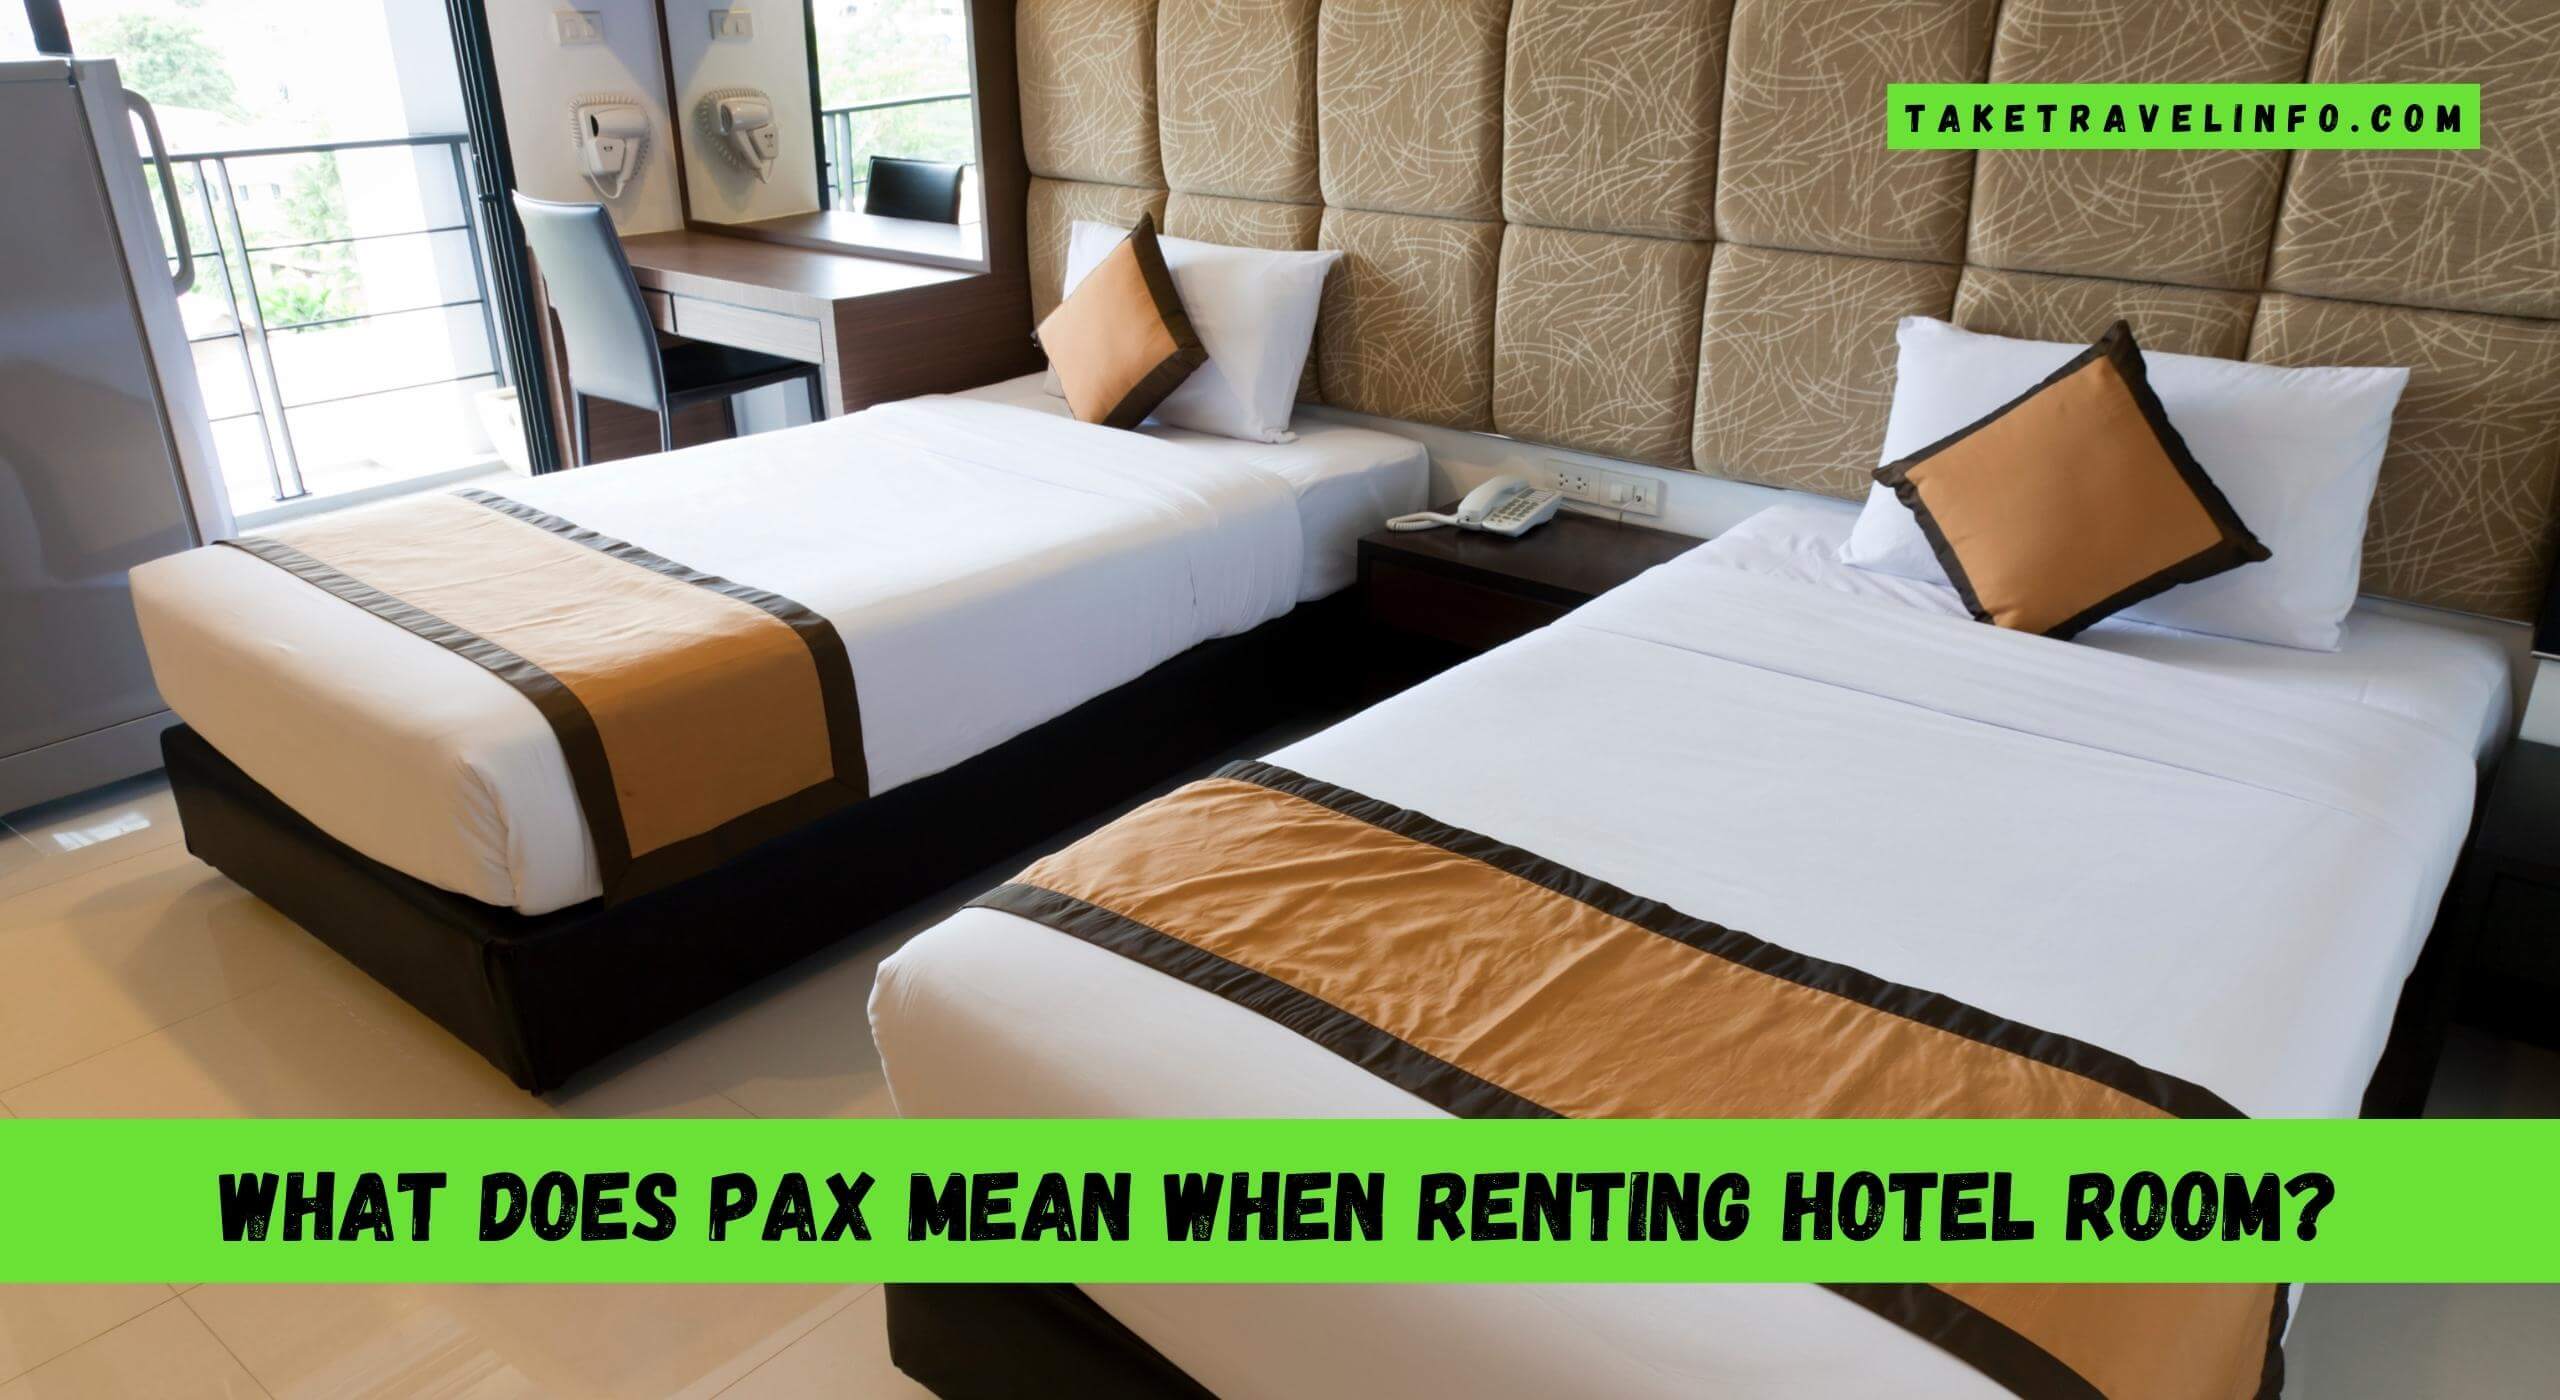 What Does Pax Mean When Renting Hotel Room?